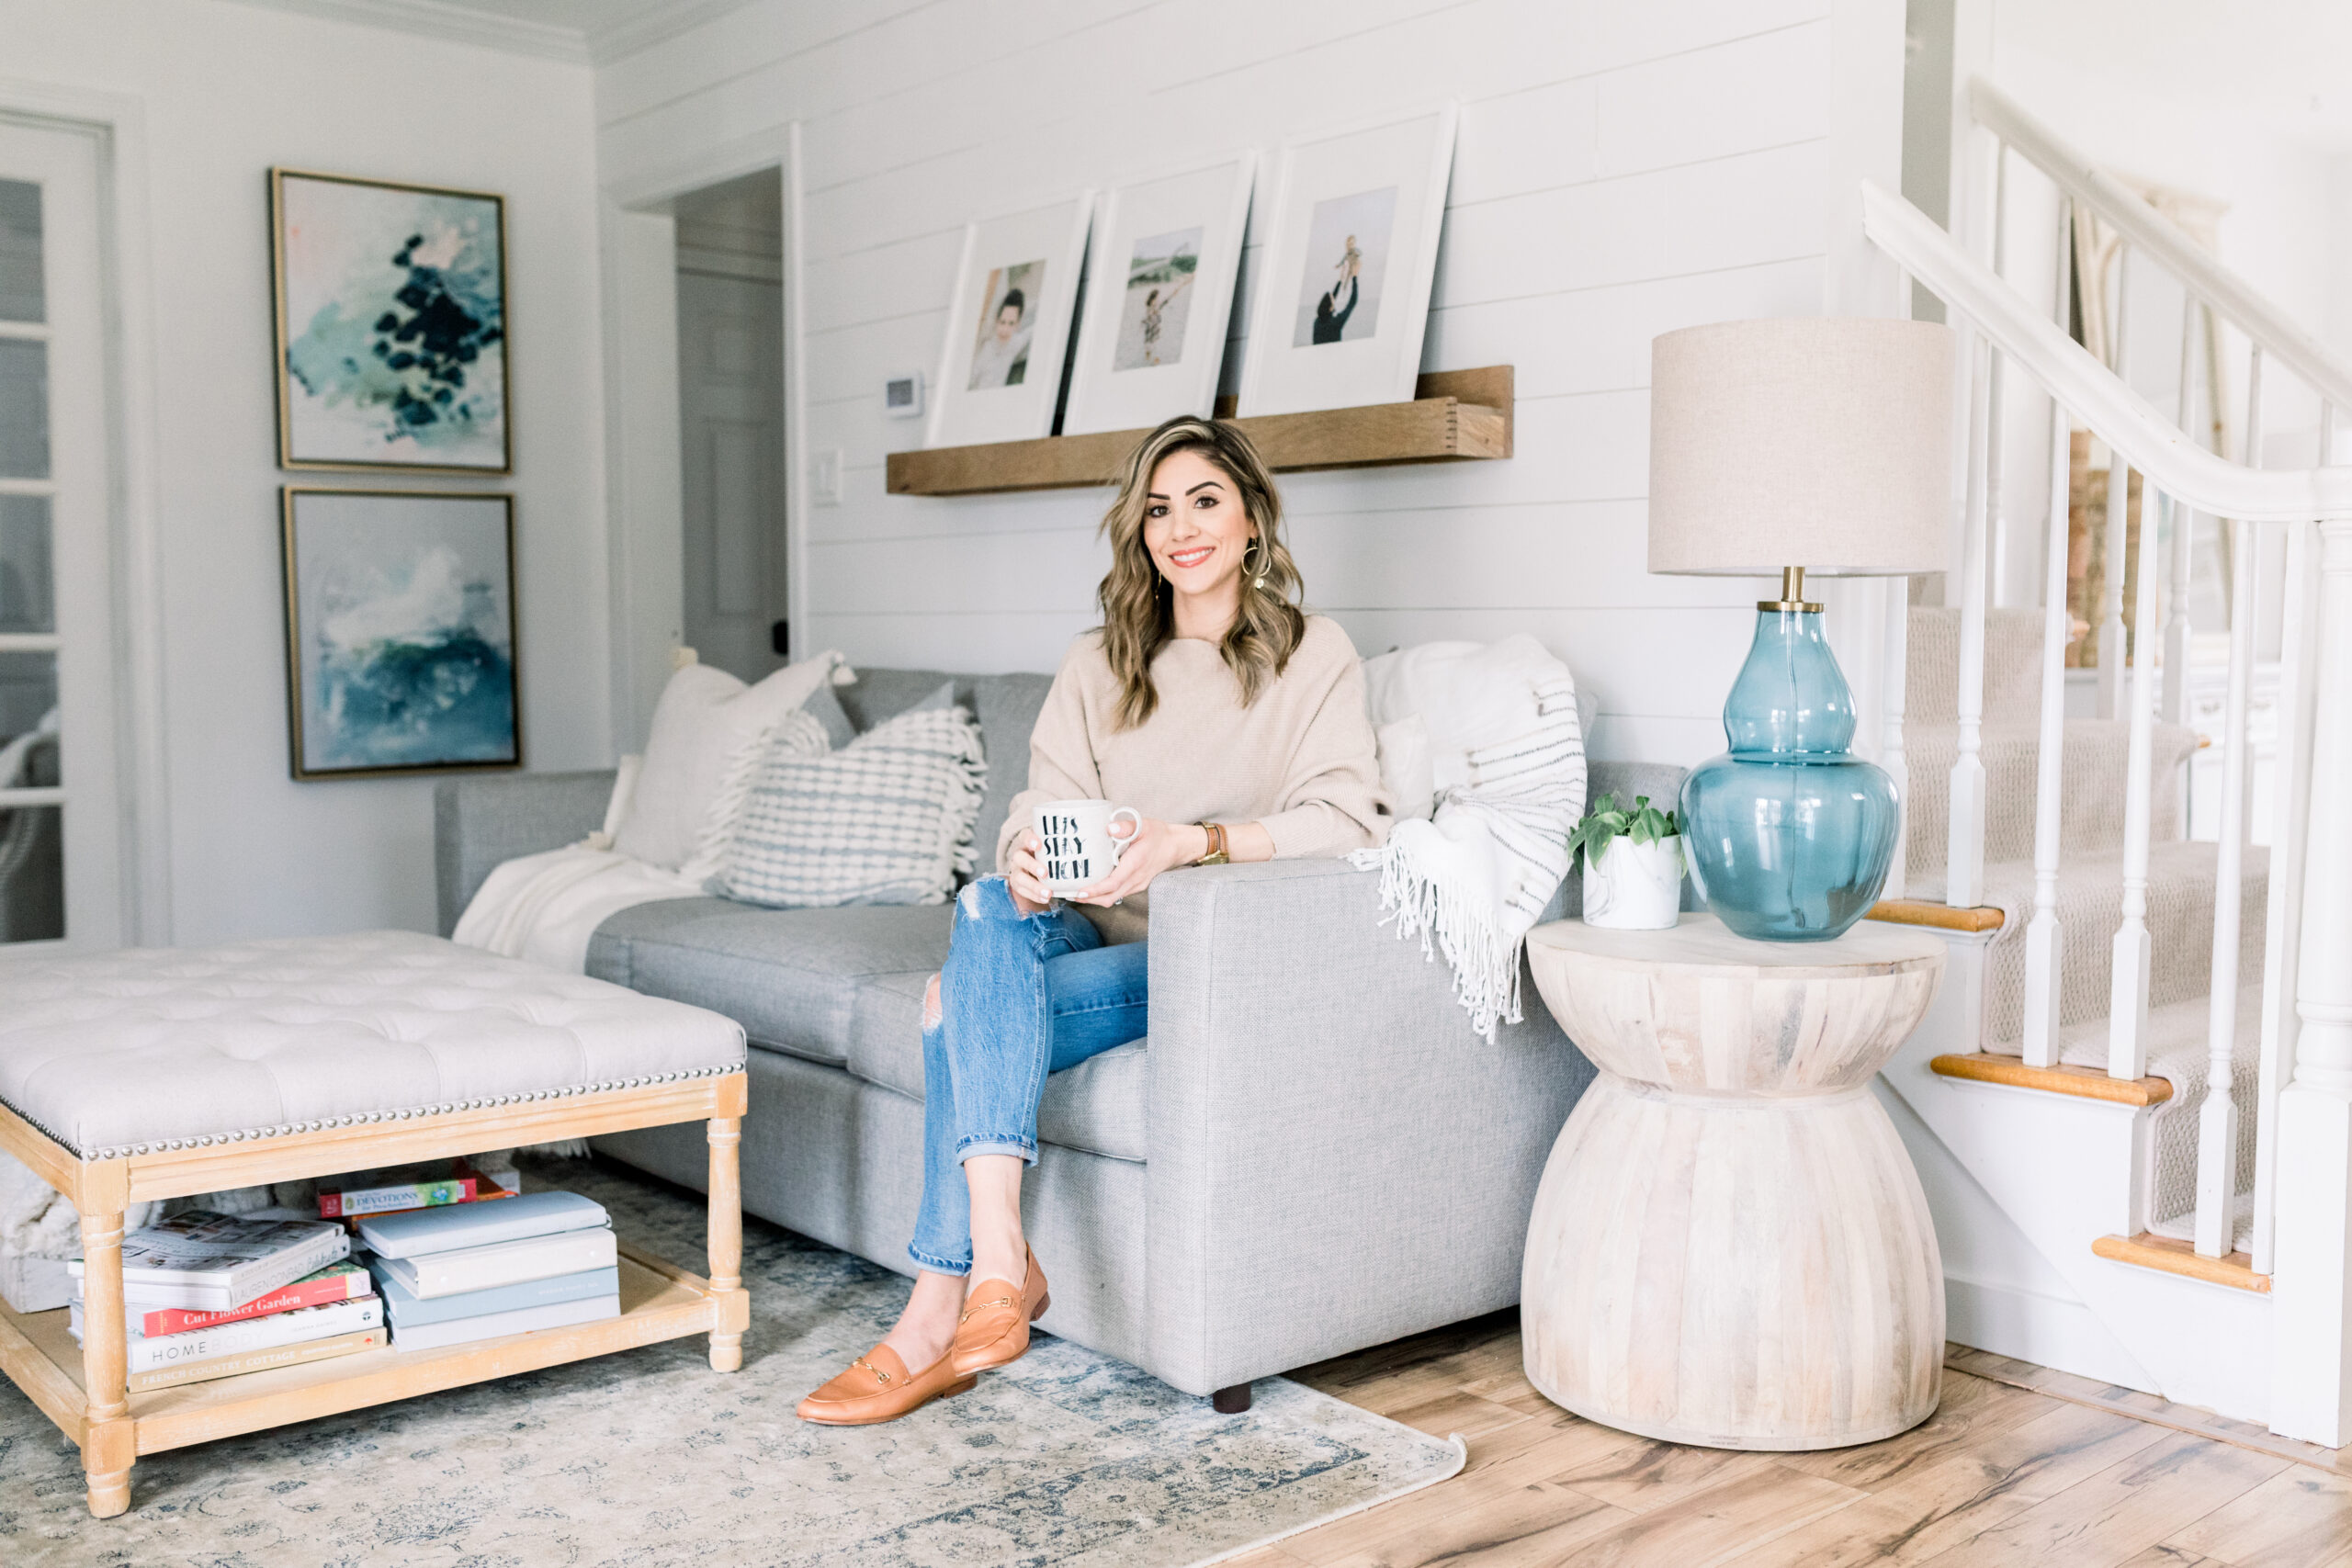 Connecticut life and style Lauren McBride shares her new self-designed home decor line, available for purchase exclusively on QVC.